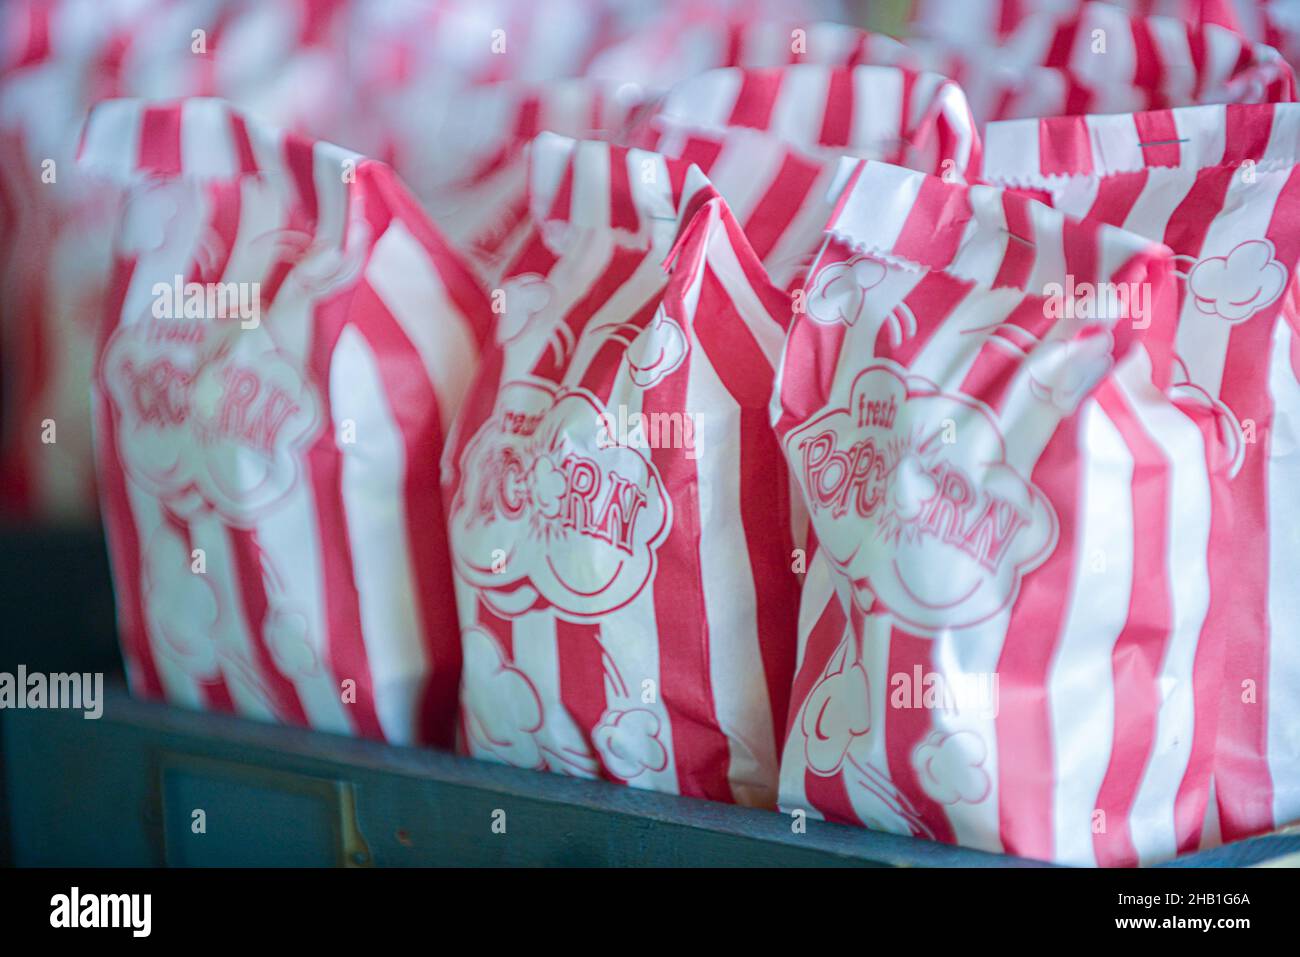 Many rows of popcorn in white paper bags with red vertical stripes and words "Fresh Popcorn" printed on the bags Stock Photo